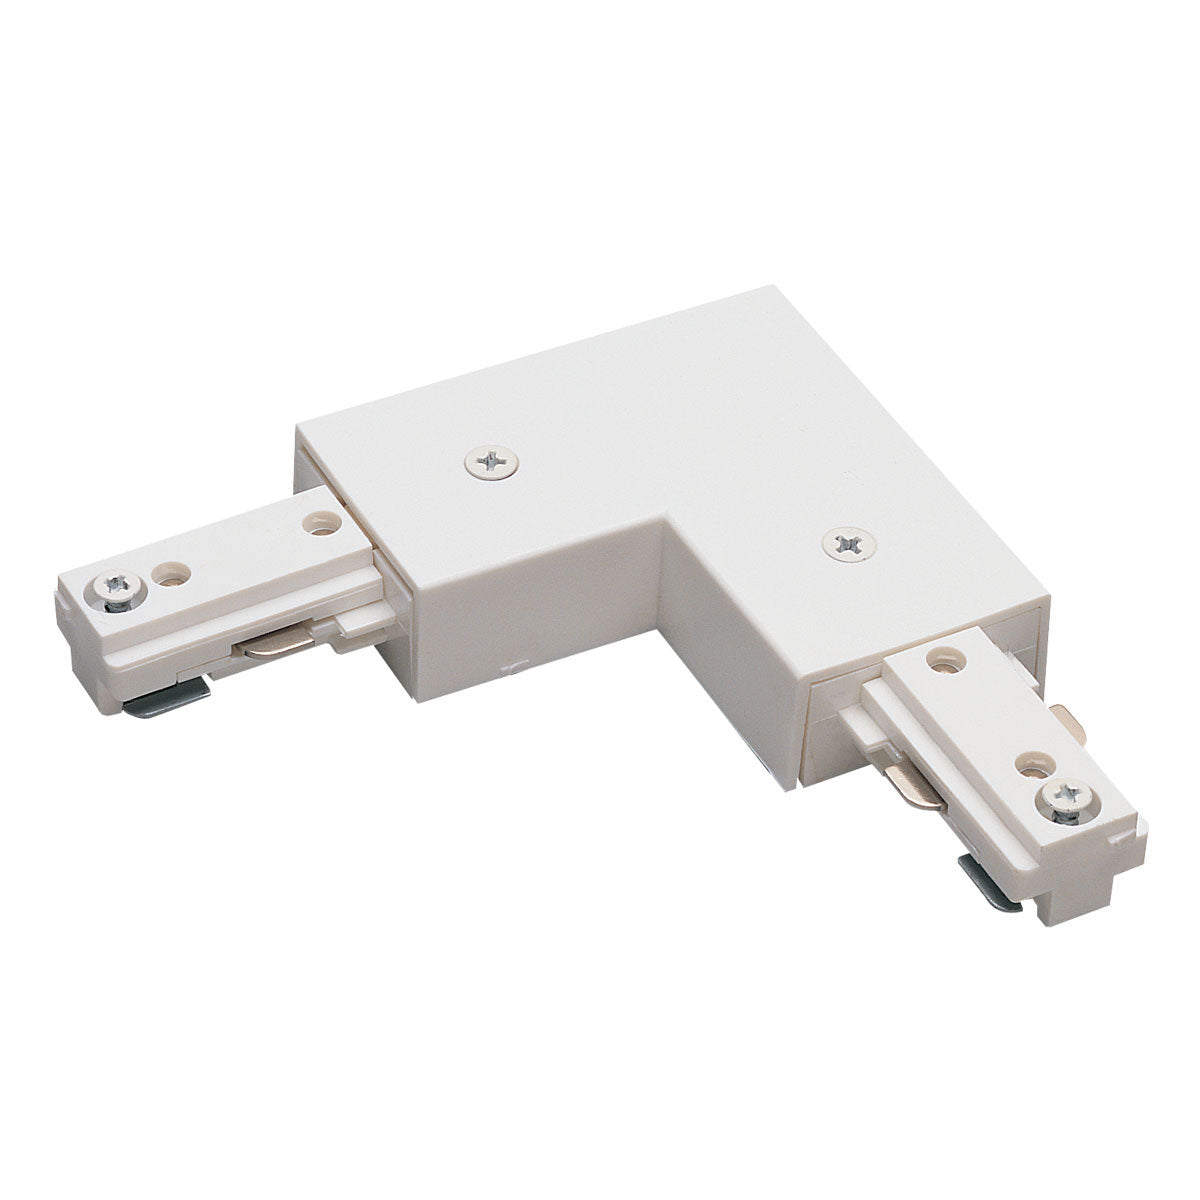 Nora Lighting NT-2313W - Track - L Connector, 2 Circuit Track Left or Right Polarity, White